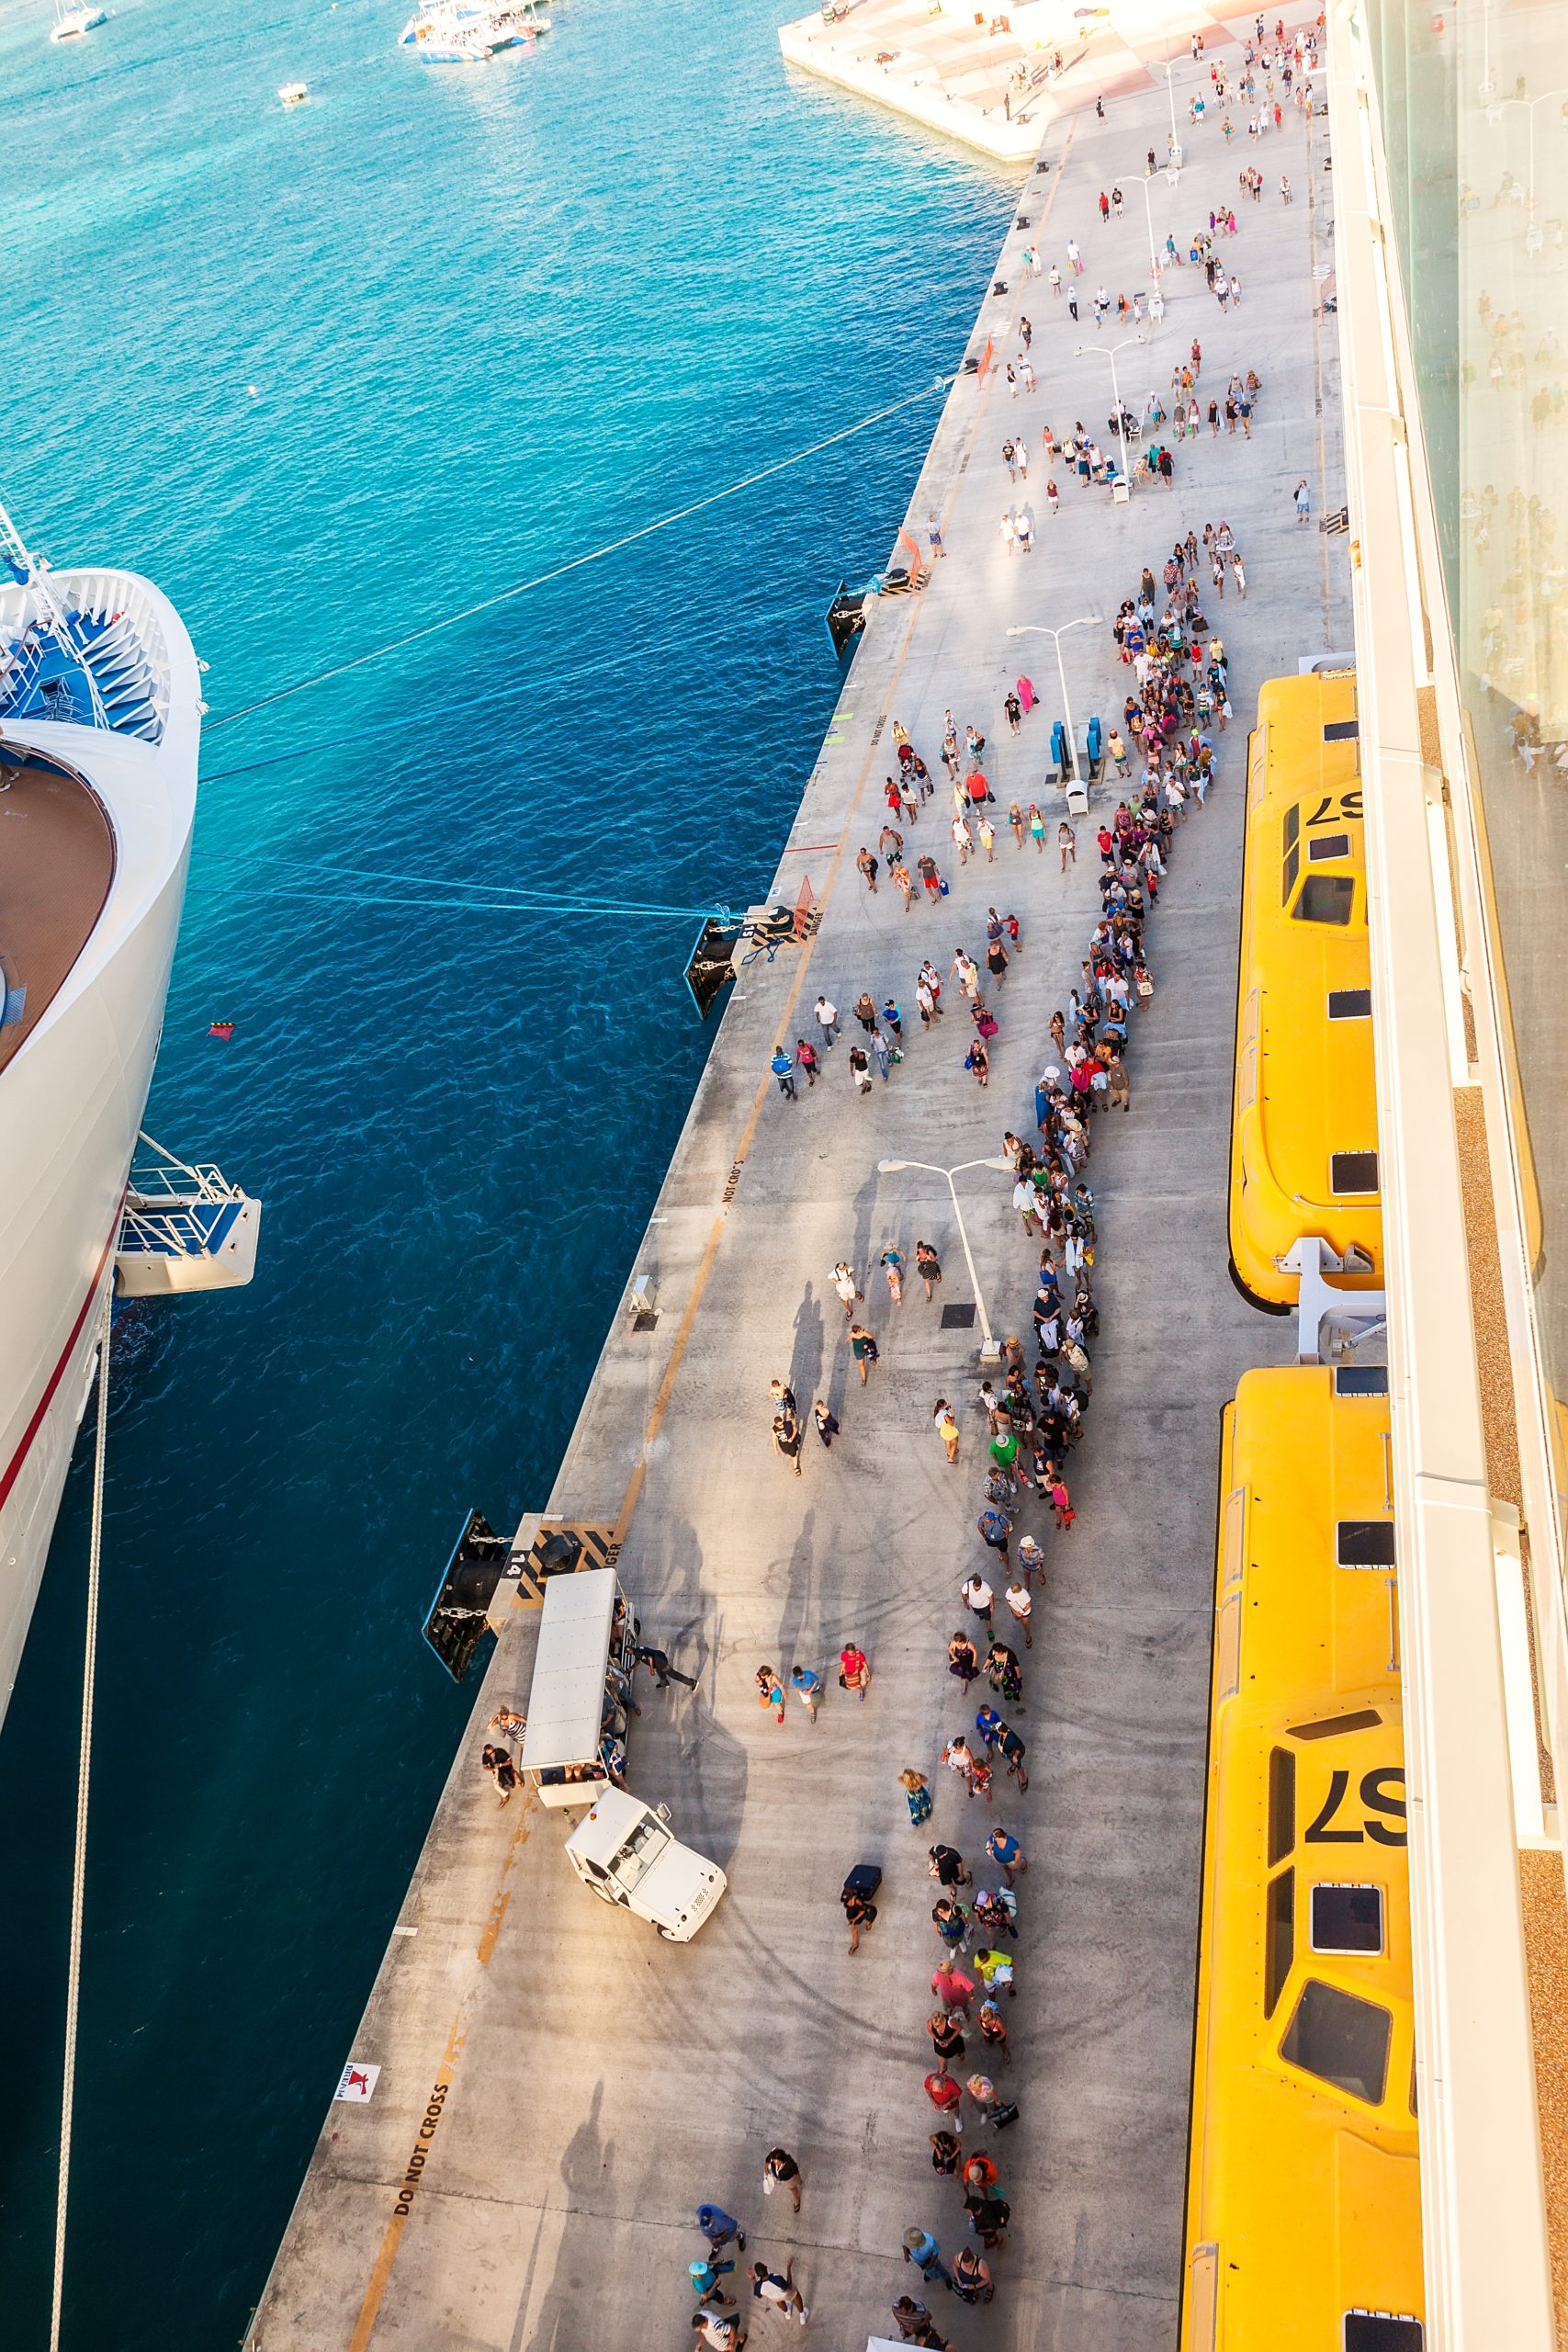 How Long Does it Take to Disembark from a Royal Caribbean Cruise Ship?